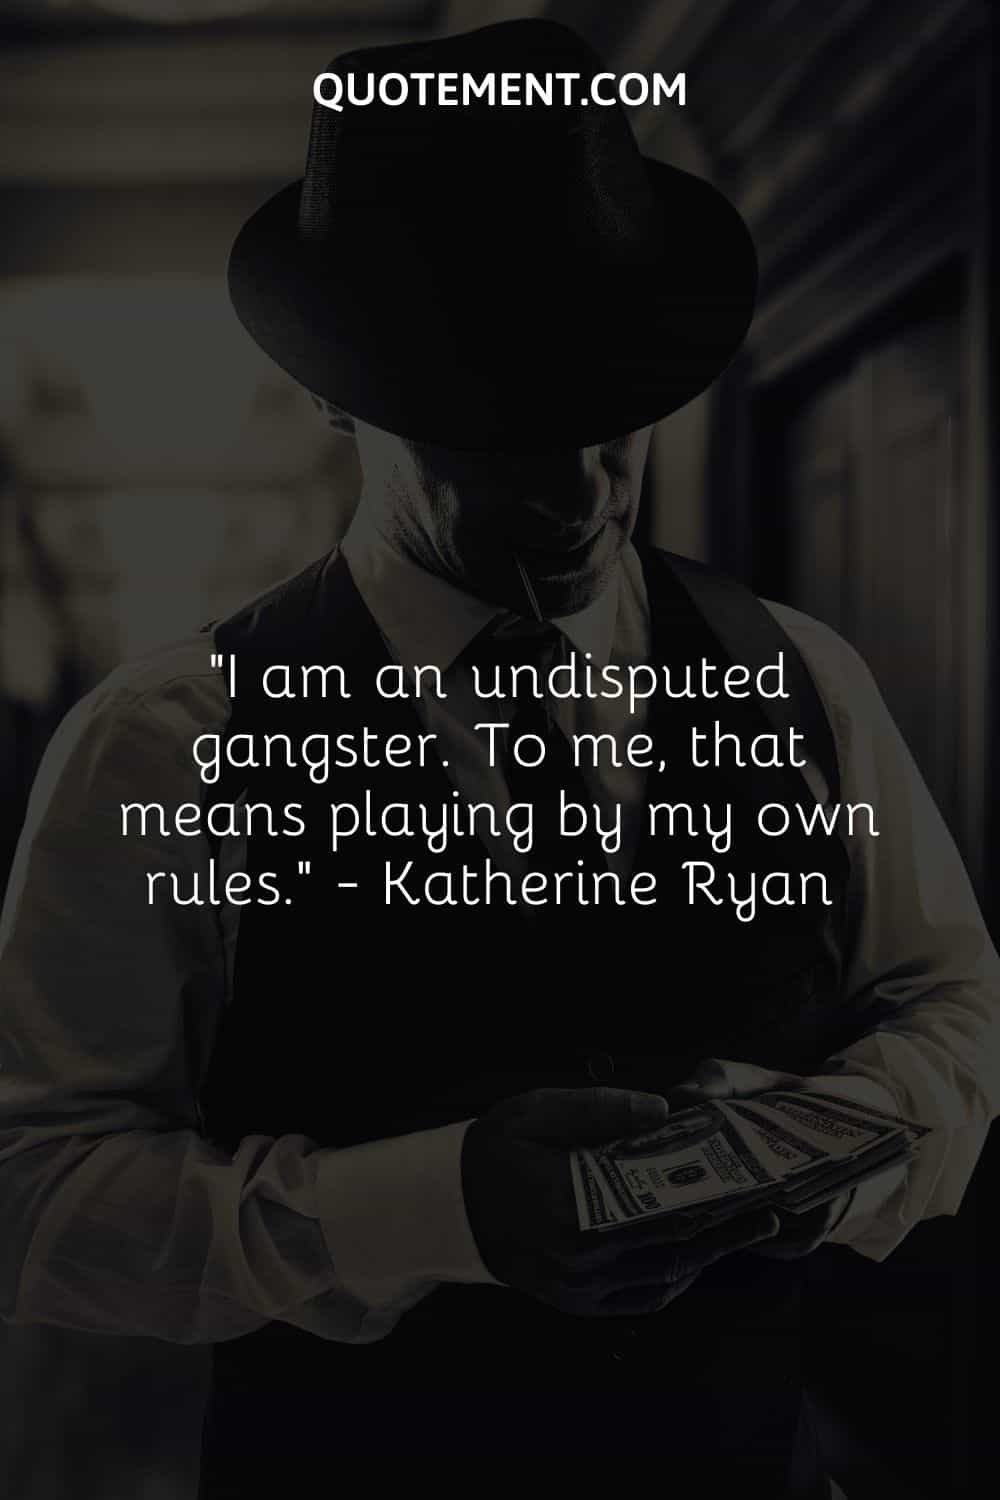 I am an undisputed gangster. To me, that means playing by my own rules